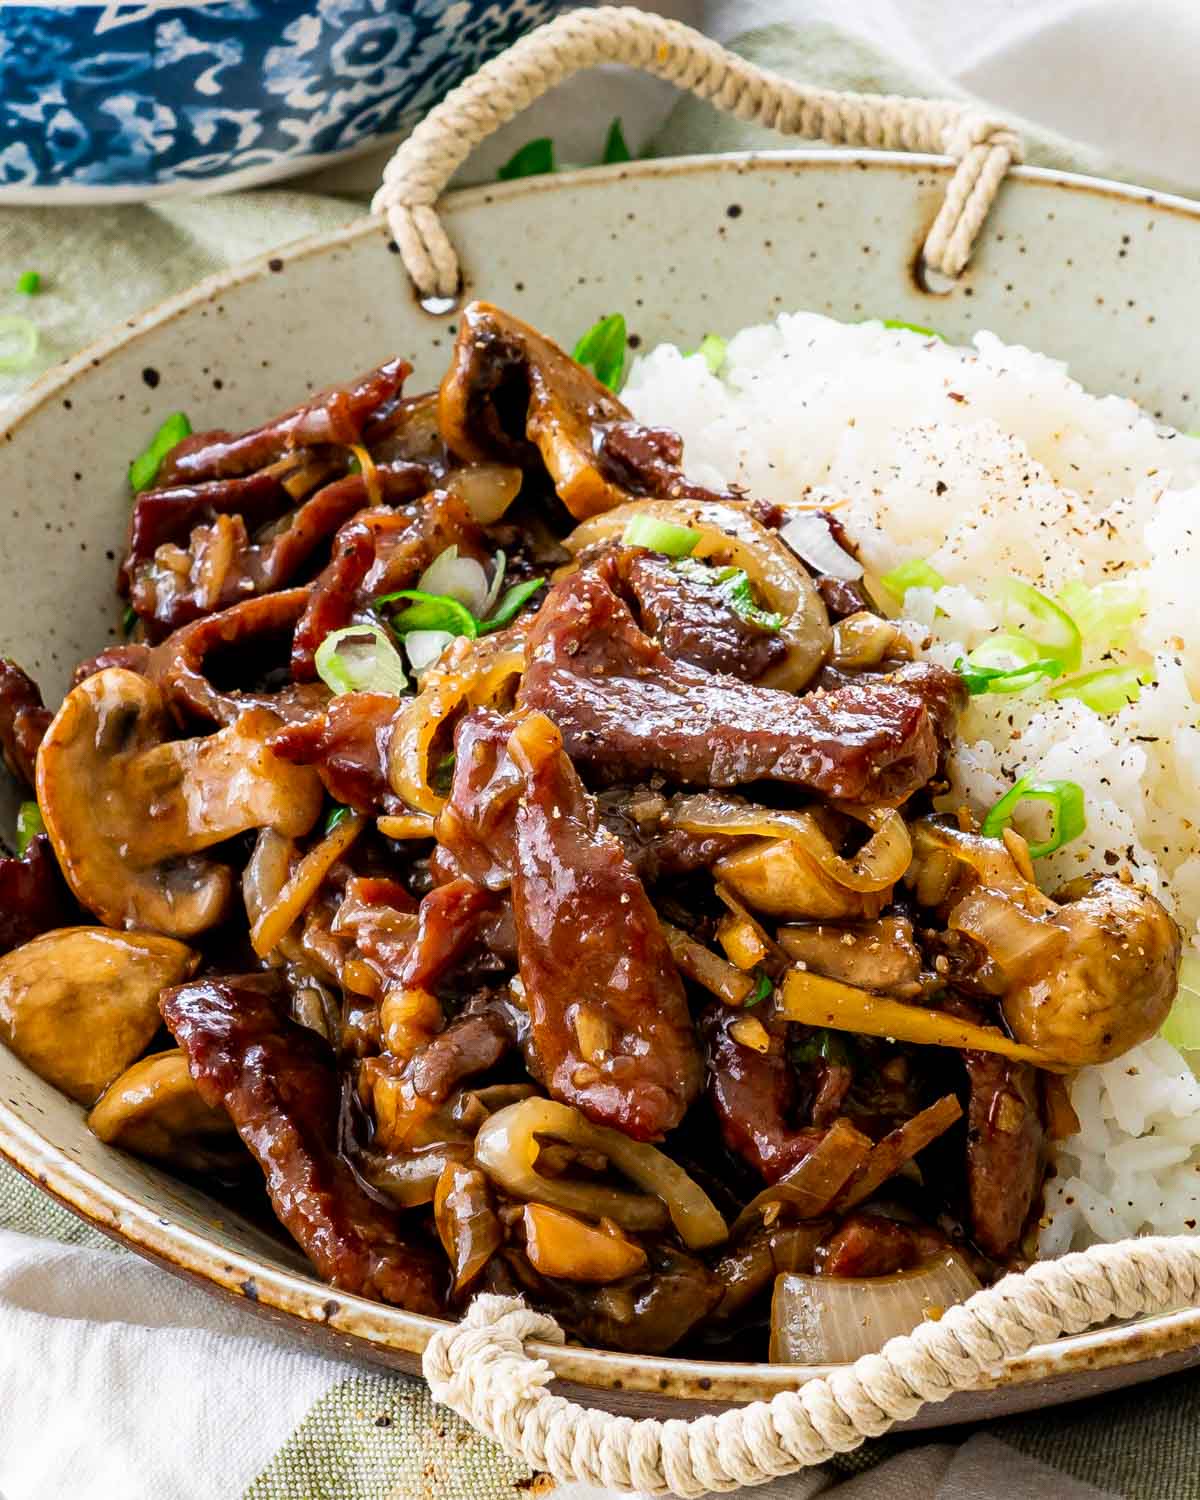 beef mushroom stir fry next to some rice in a plate